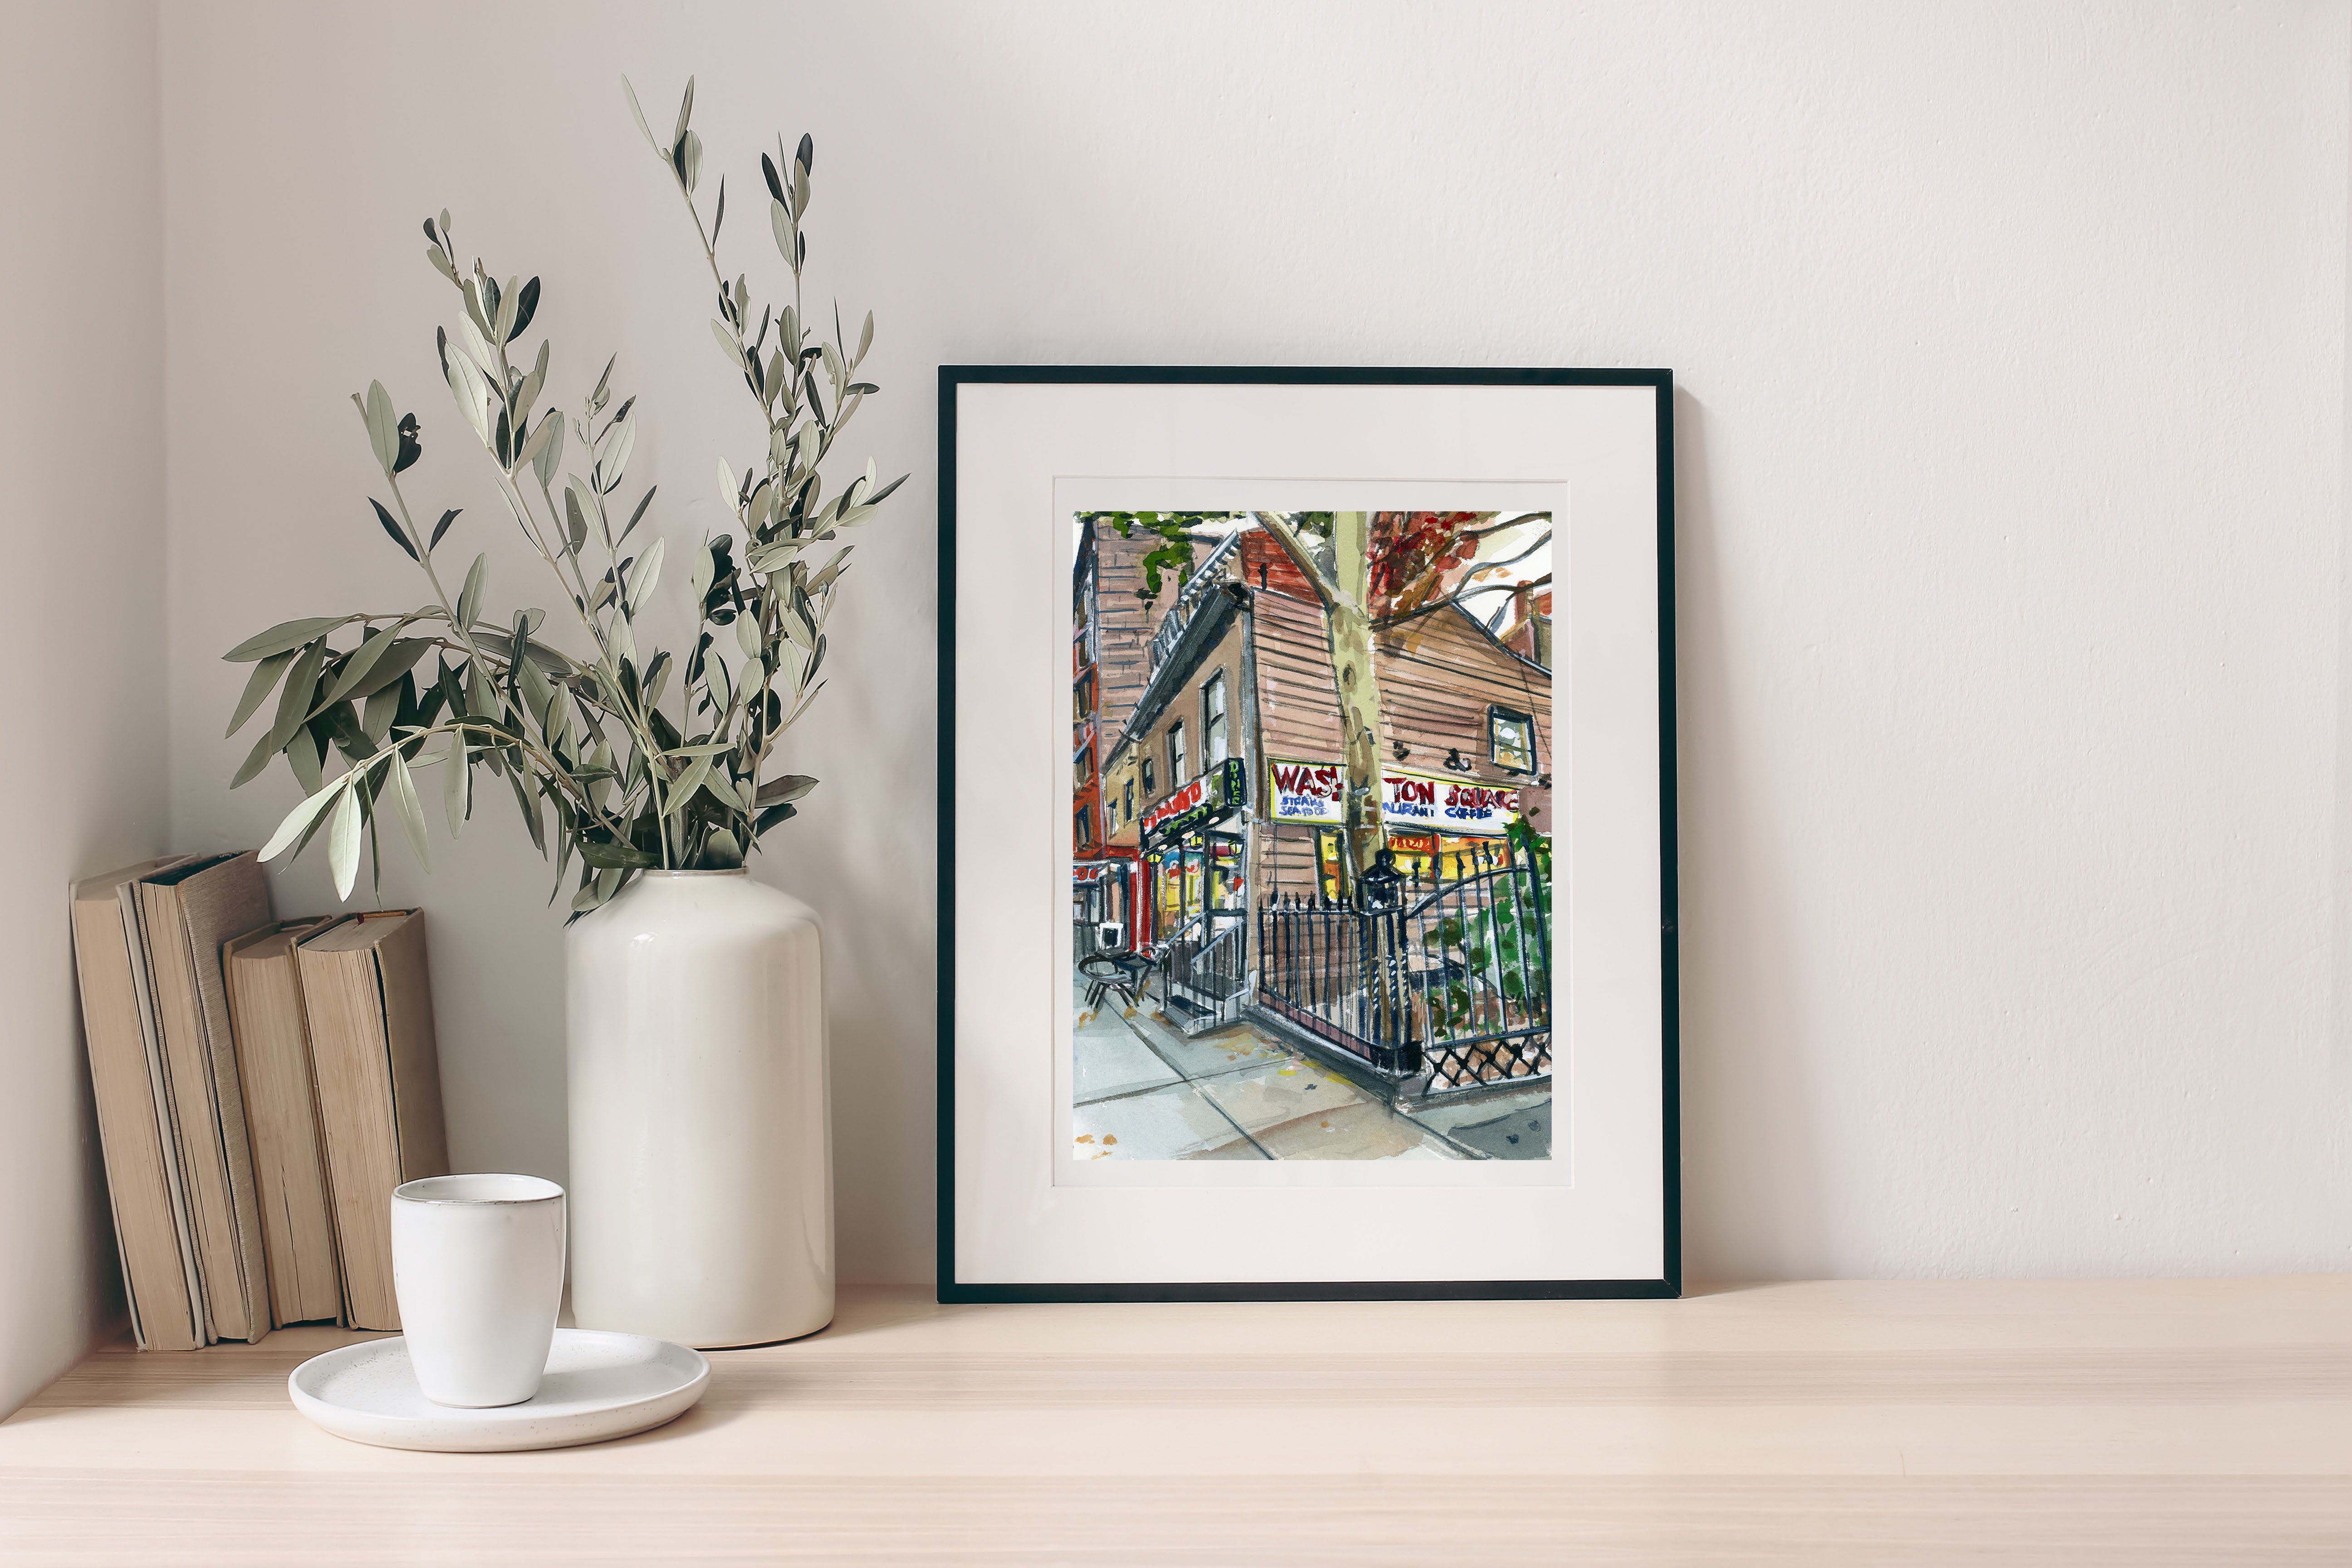 Washington Square print of painting by Medjool Studio. Print of original gouache painting capturing the scene of a corner store using vibrant colors and dynamic composition.